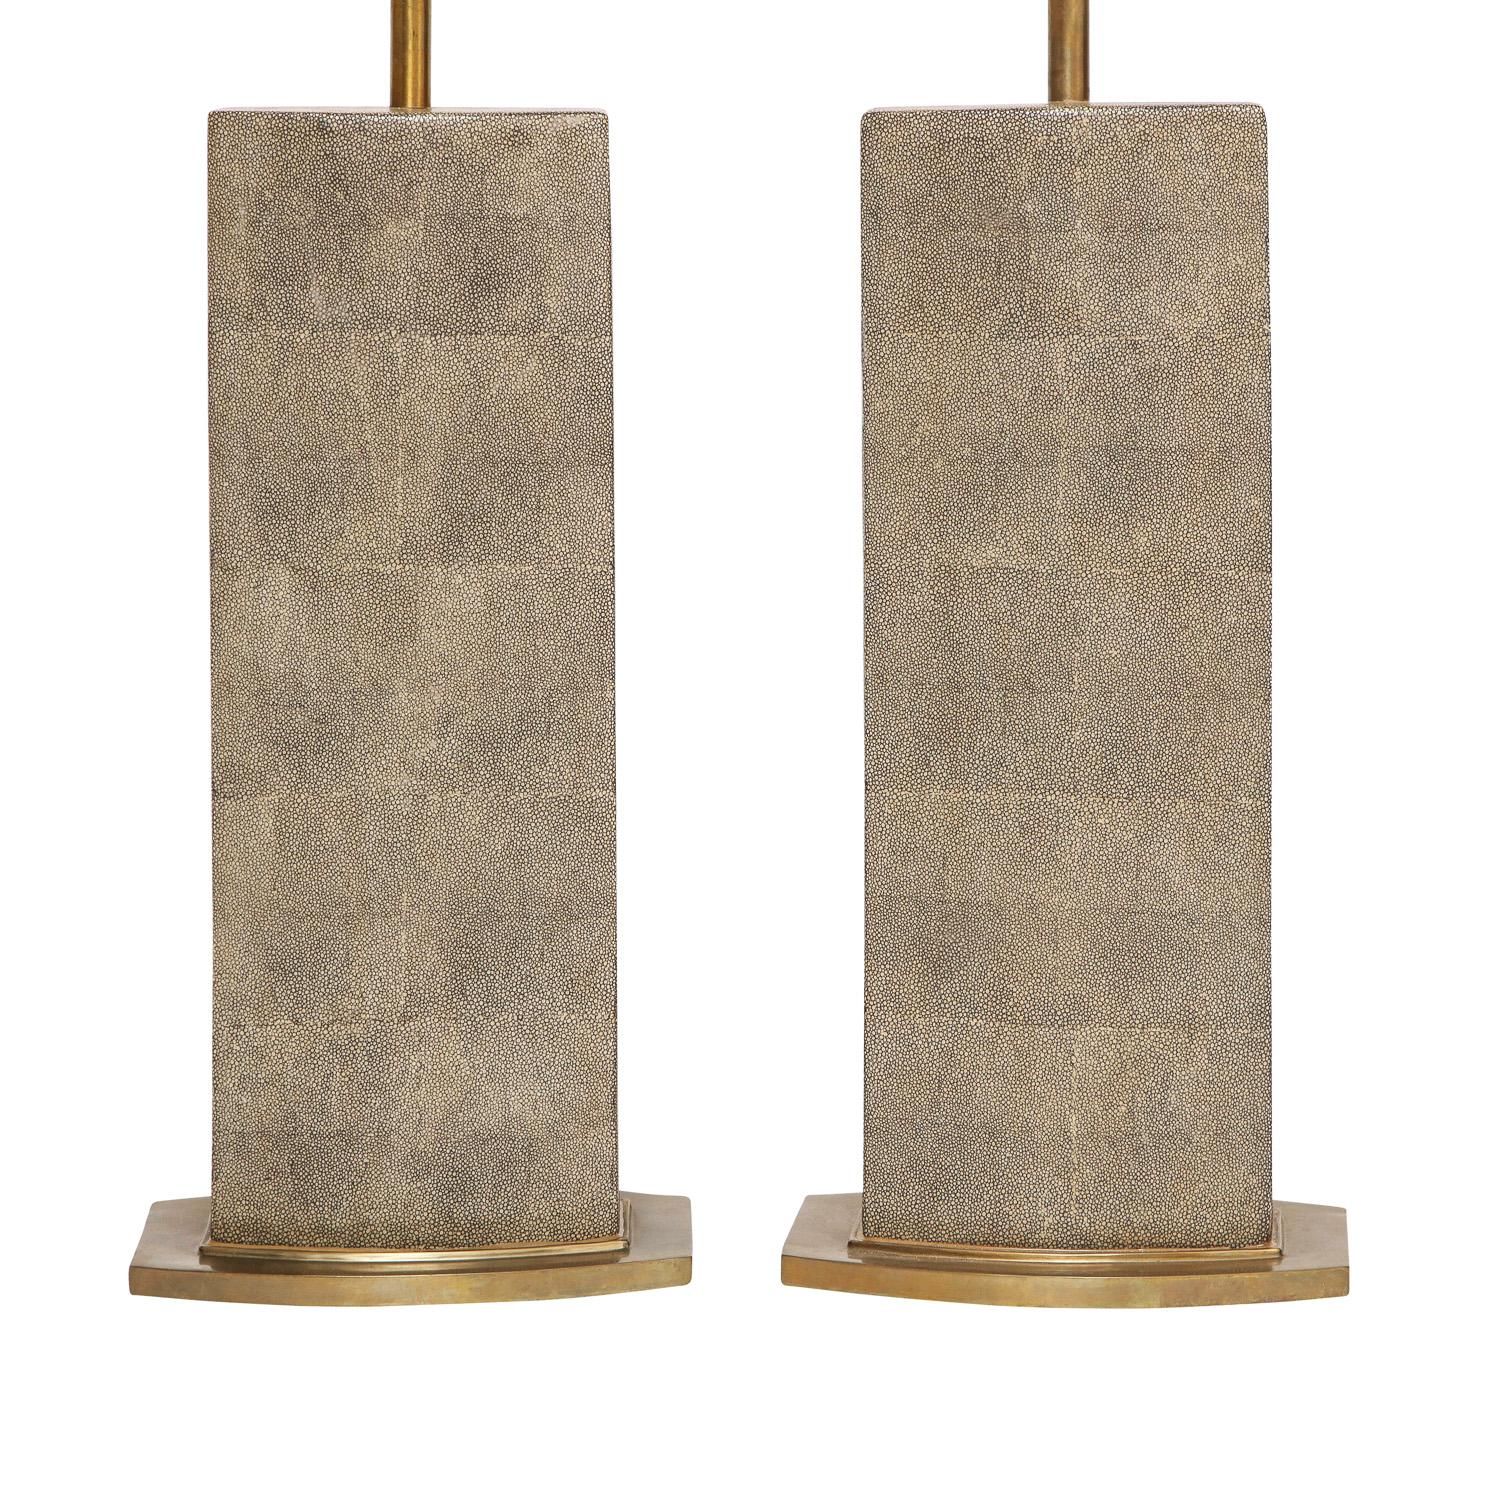 Pair of large artisan table lamps in taupe shagreen with brass bases and hardware, custom design, American 1970's. These lamps are of the highest quality and very refined.

Shade Diameter: 16 inches
Shade Height: 13 inches.